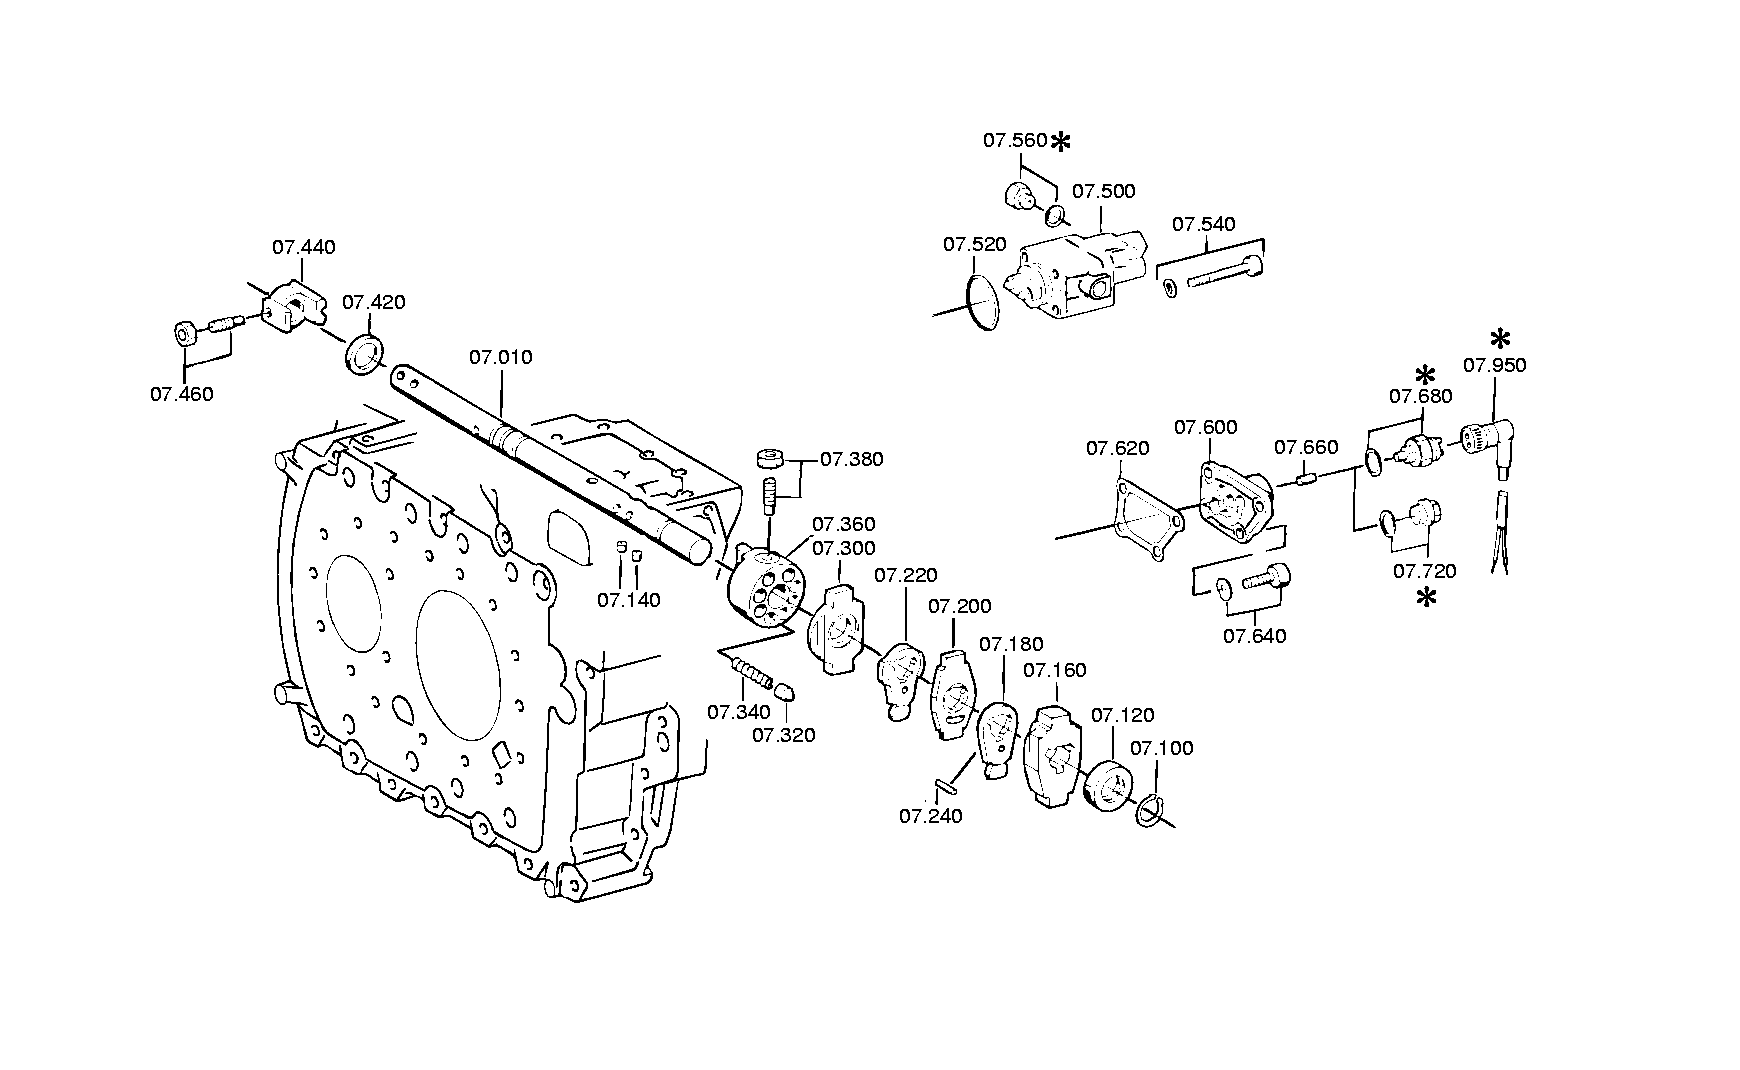 drawing for DAF 692183 - CUT-OFF VALVE (figure 5)